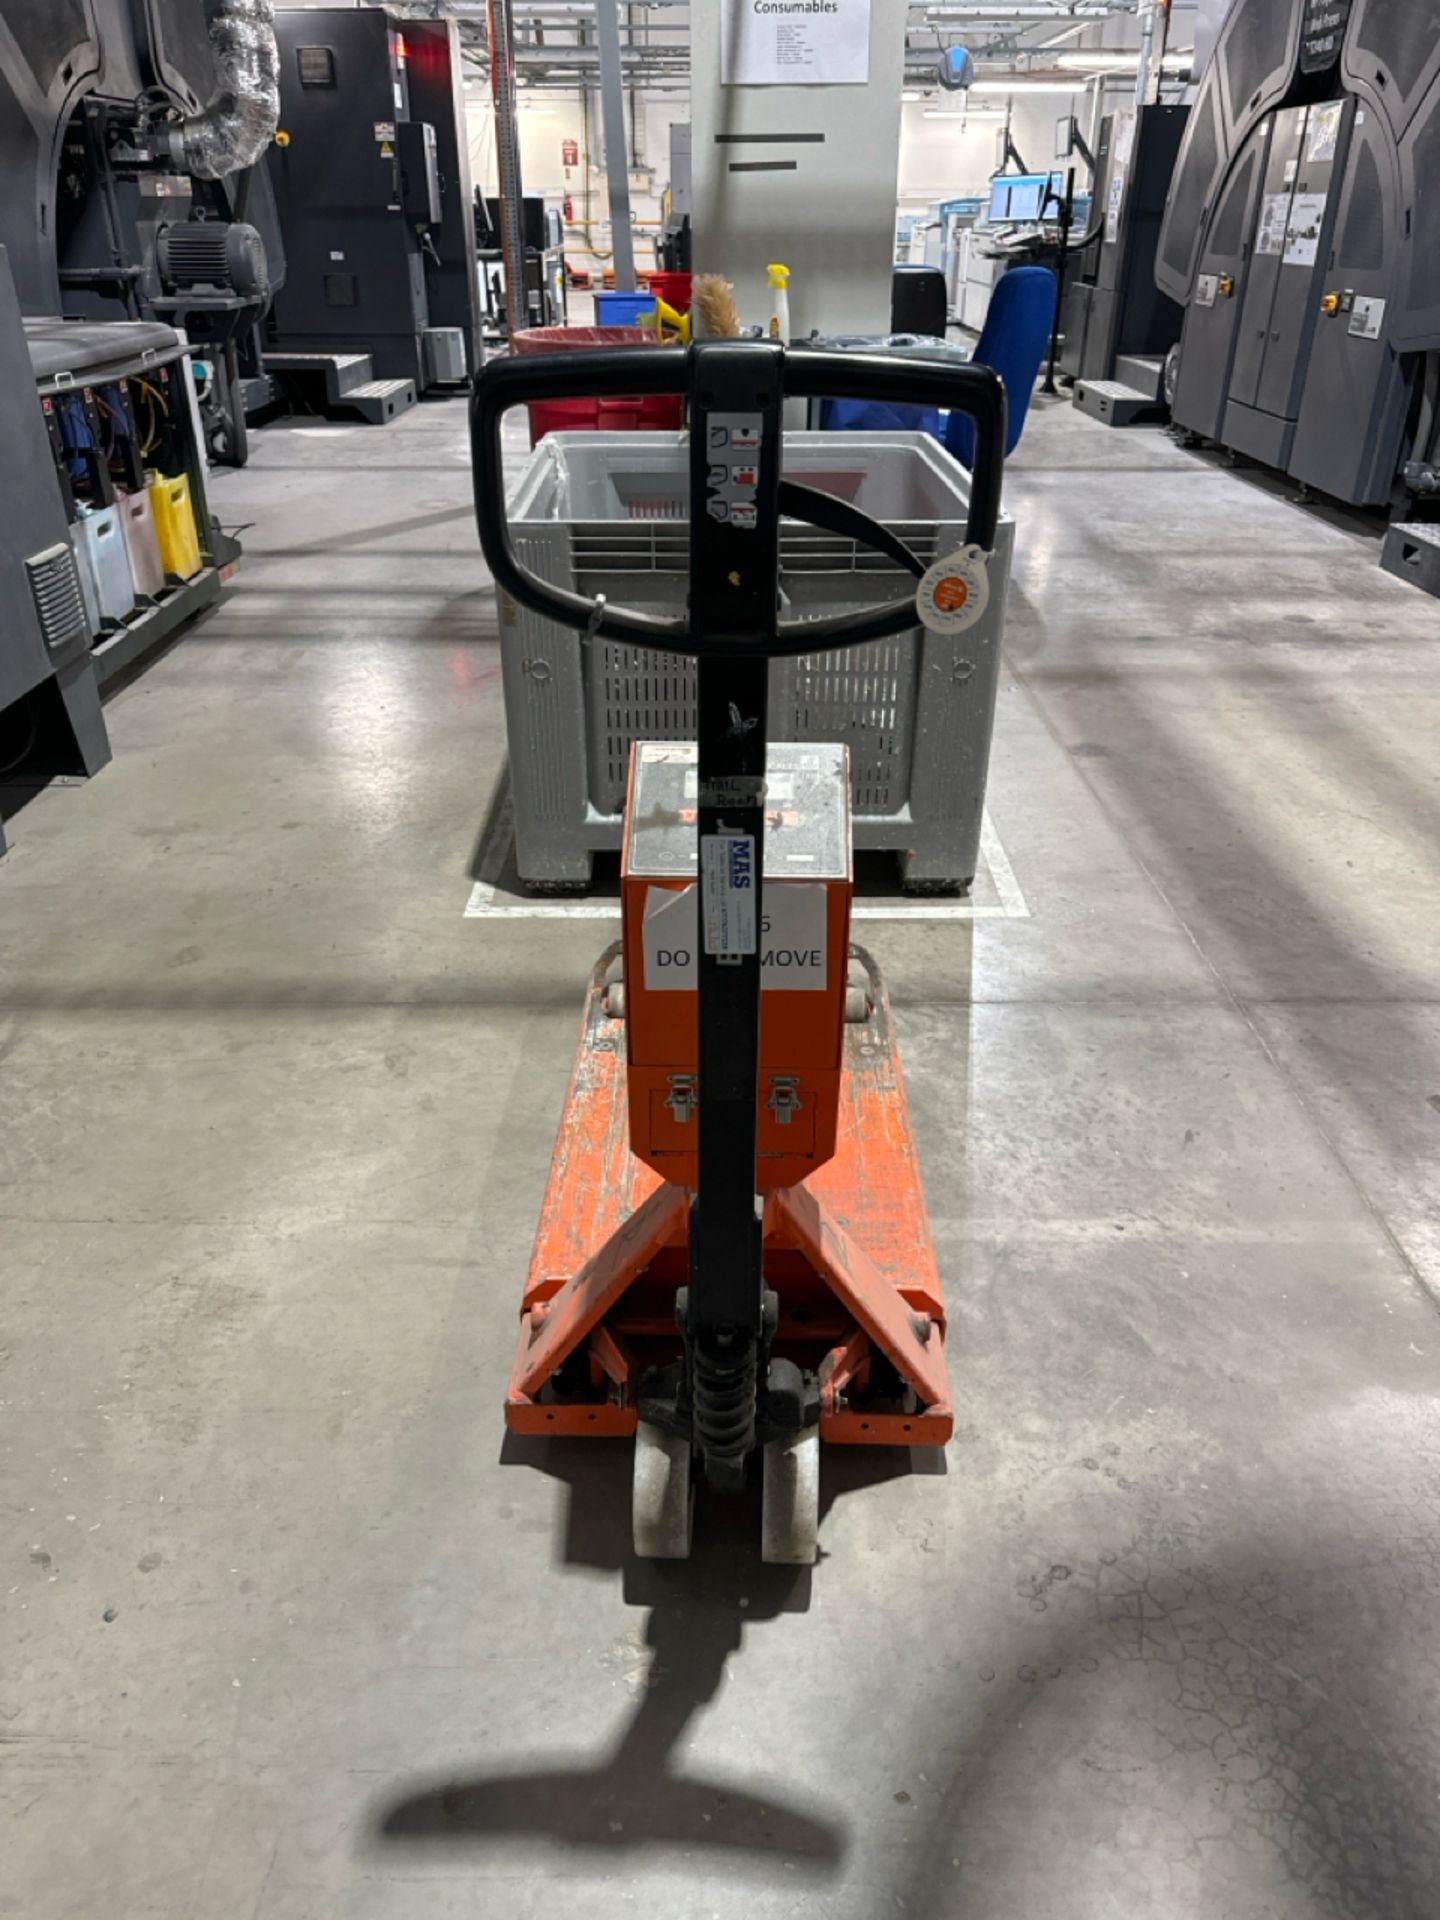 Pallet Truck With Weight Scales - Image 3 of 5